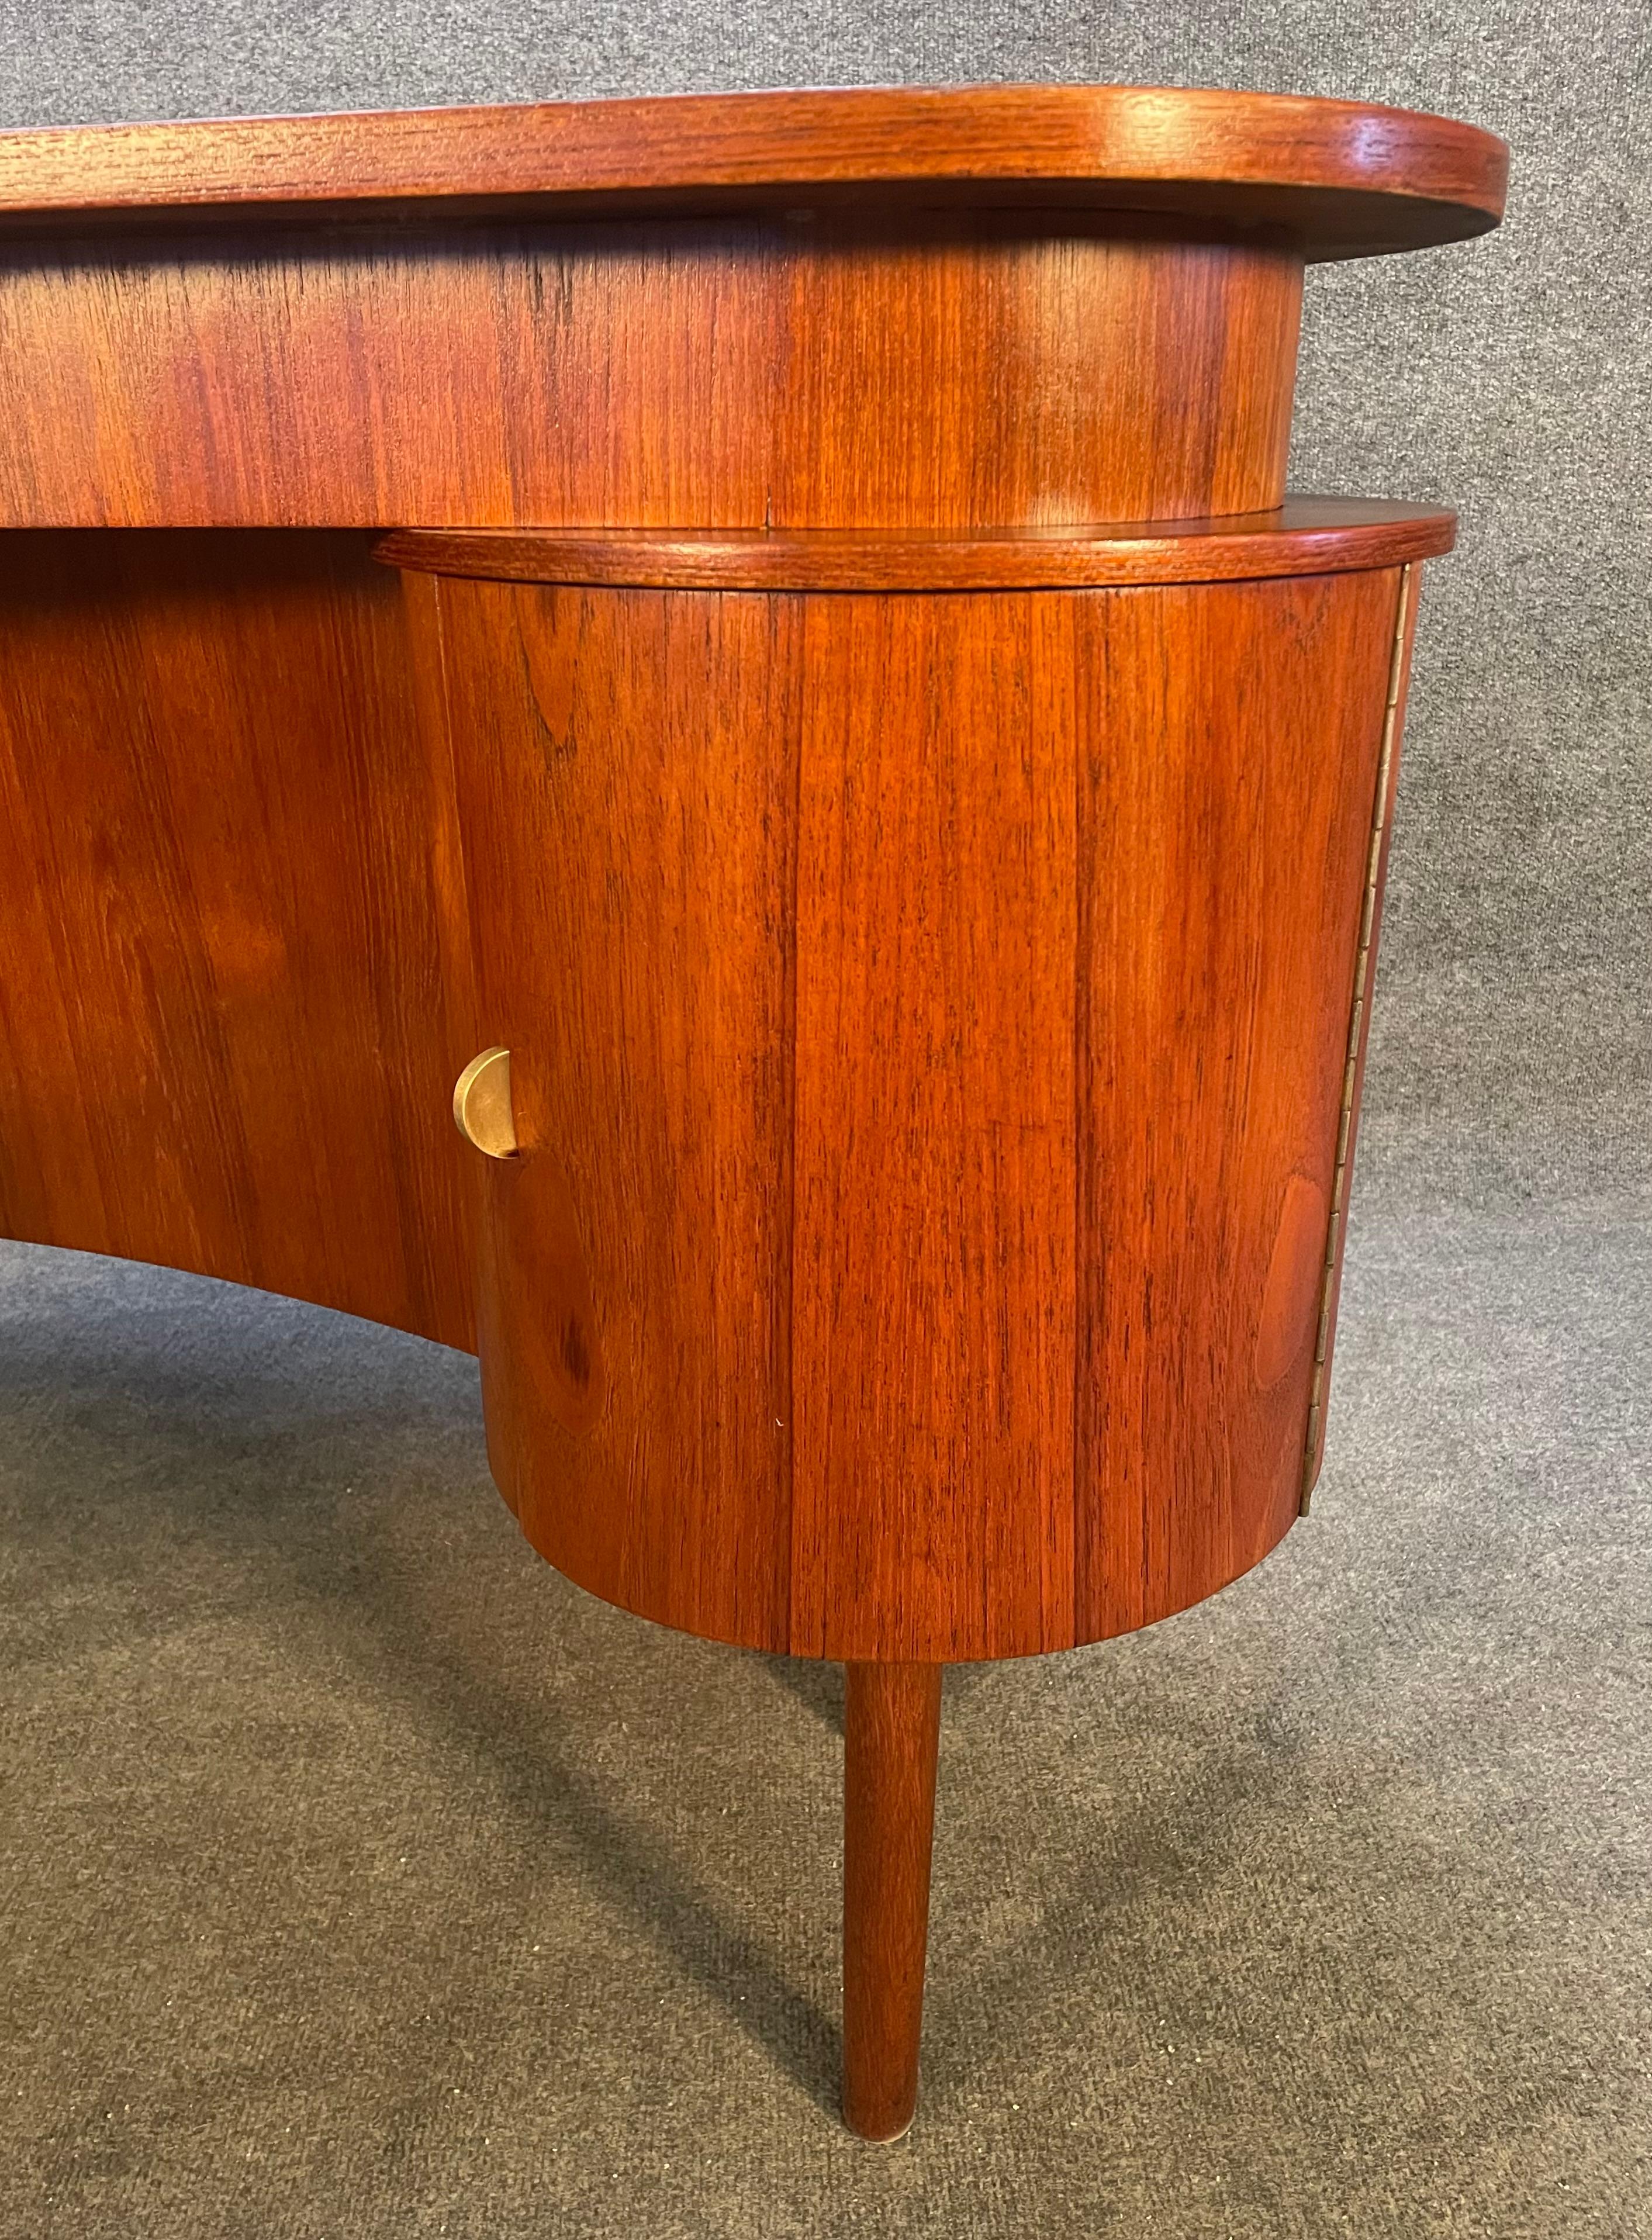 Here is a beautiful scandinavian modern desk in teak wood reminiscent of Kai Kristiansen's design manufactured in Denmark in the 1960's.
This special piece, recently imported from Europe to California before its refinishing, features a boomerang